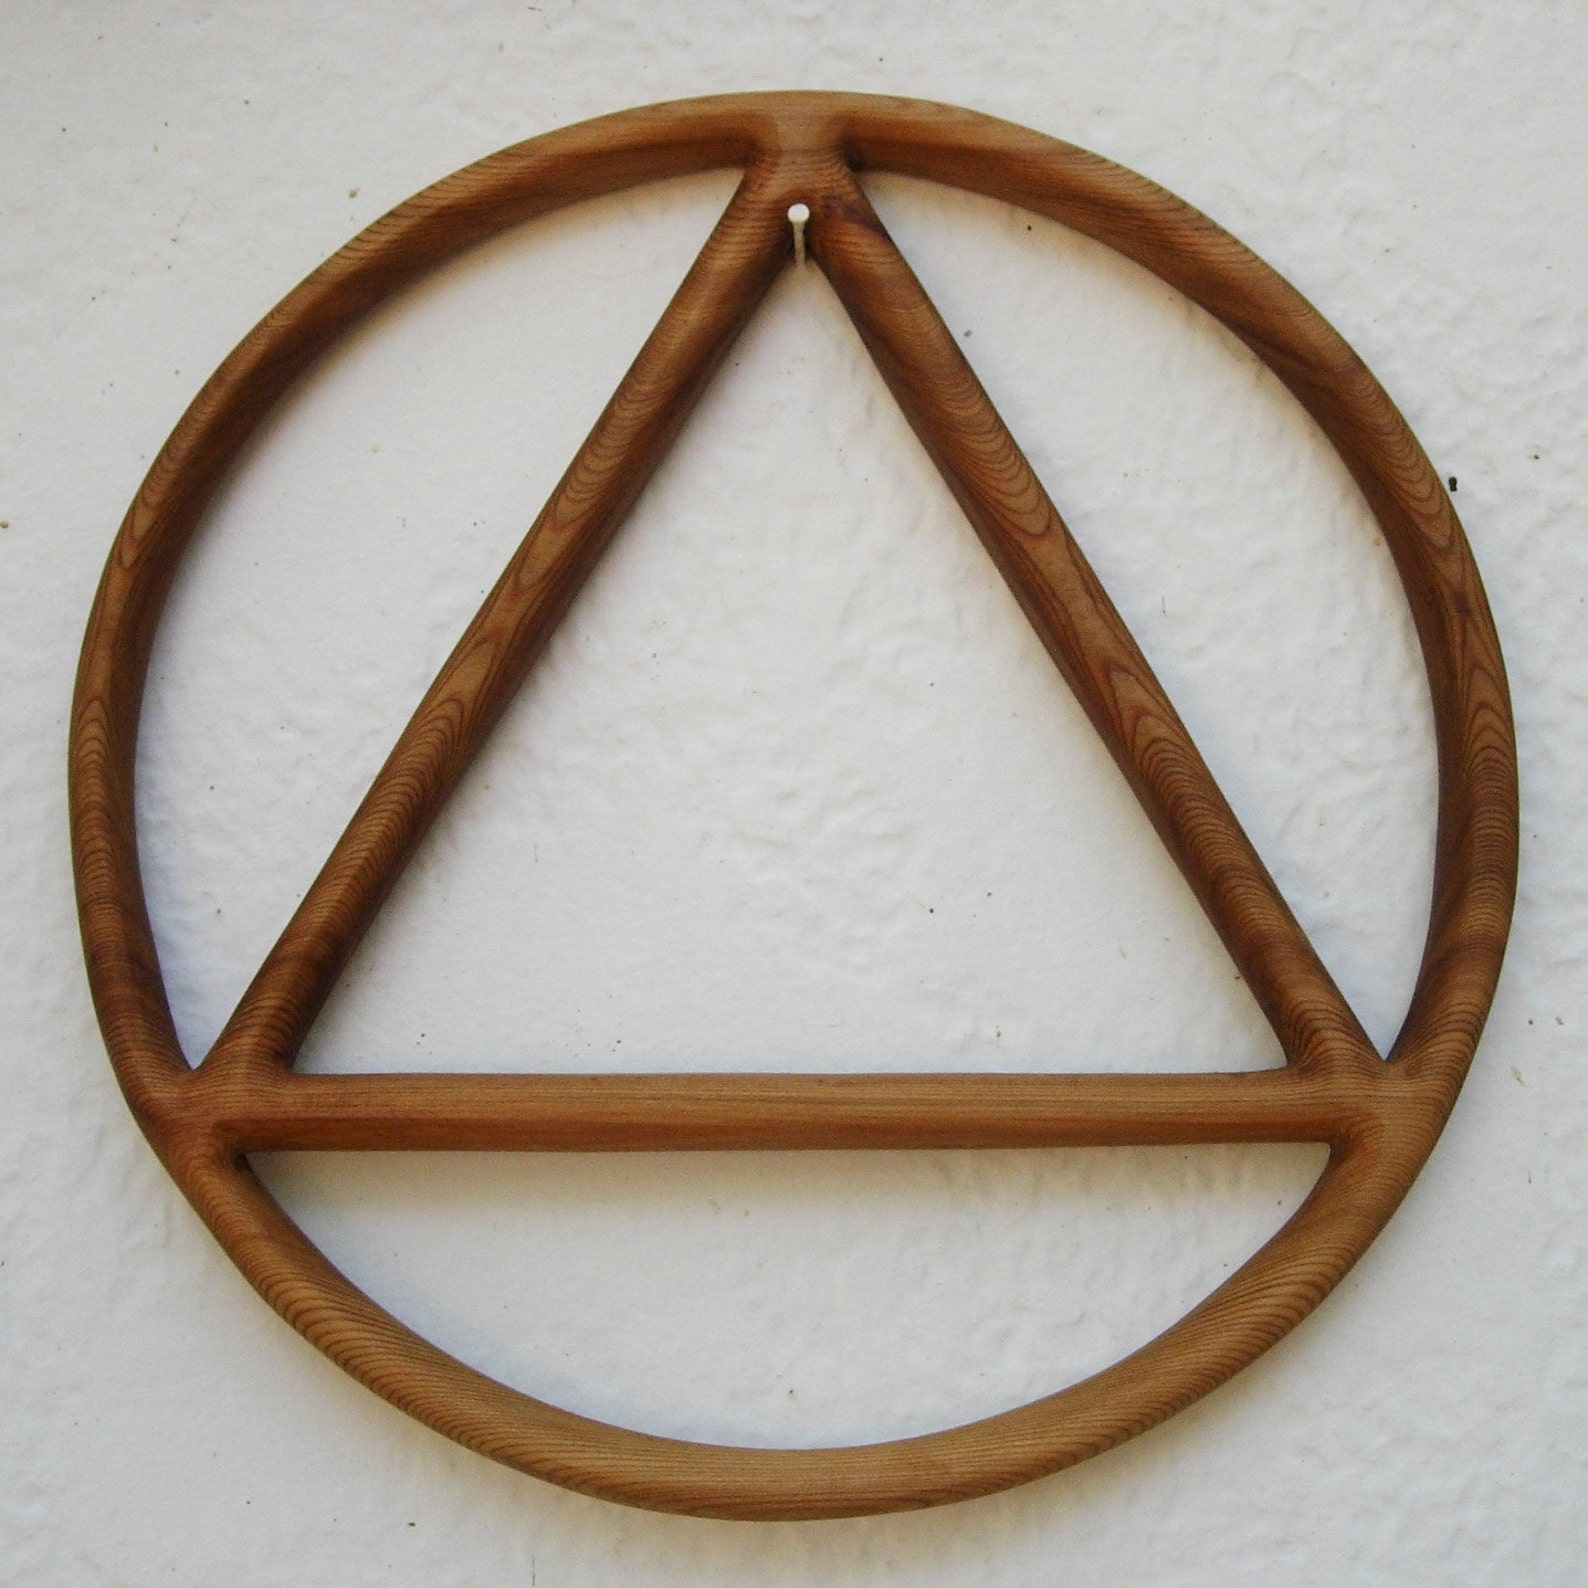 Sobriety Circle and Triangle-Wood Carved AA Recovery 12 Step Program Alcoho...